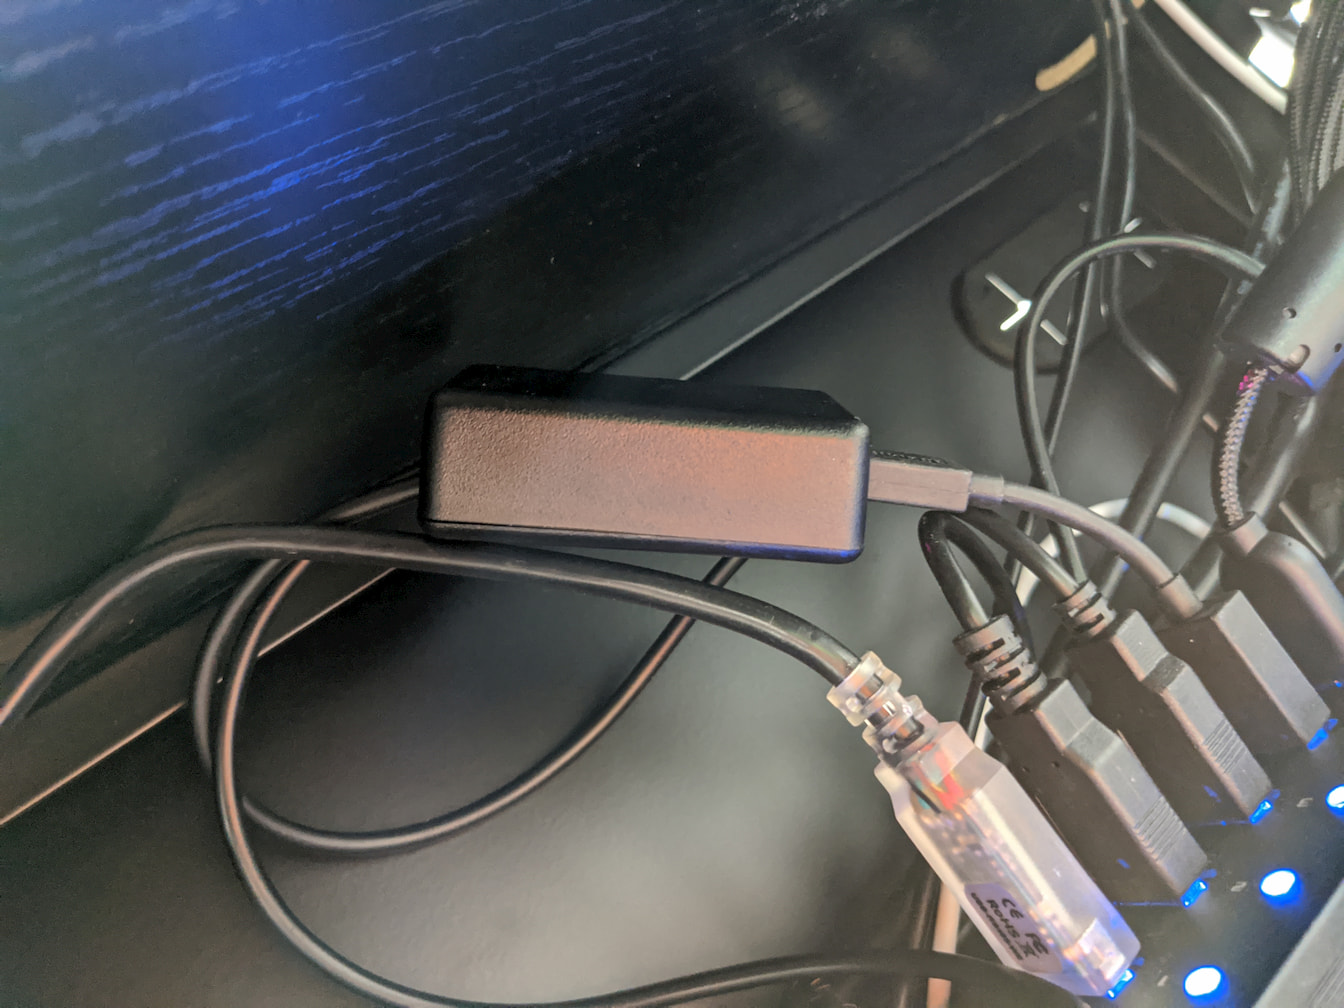 USB USB device connected under a desk